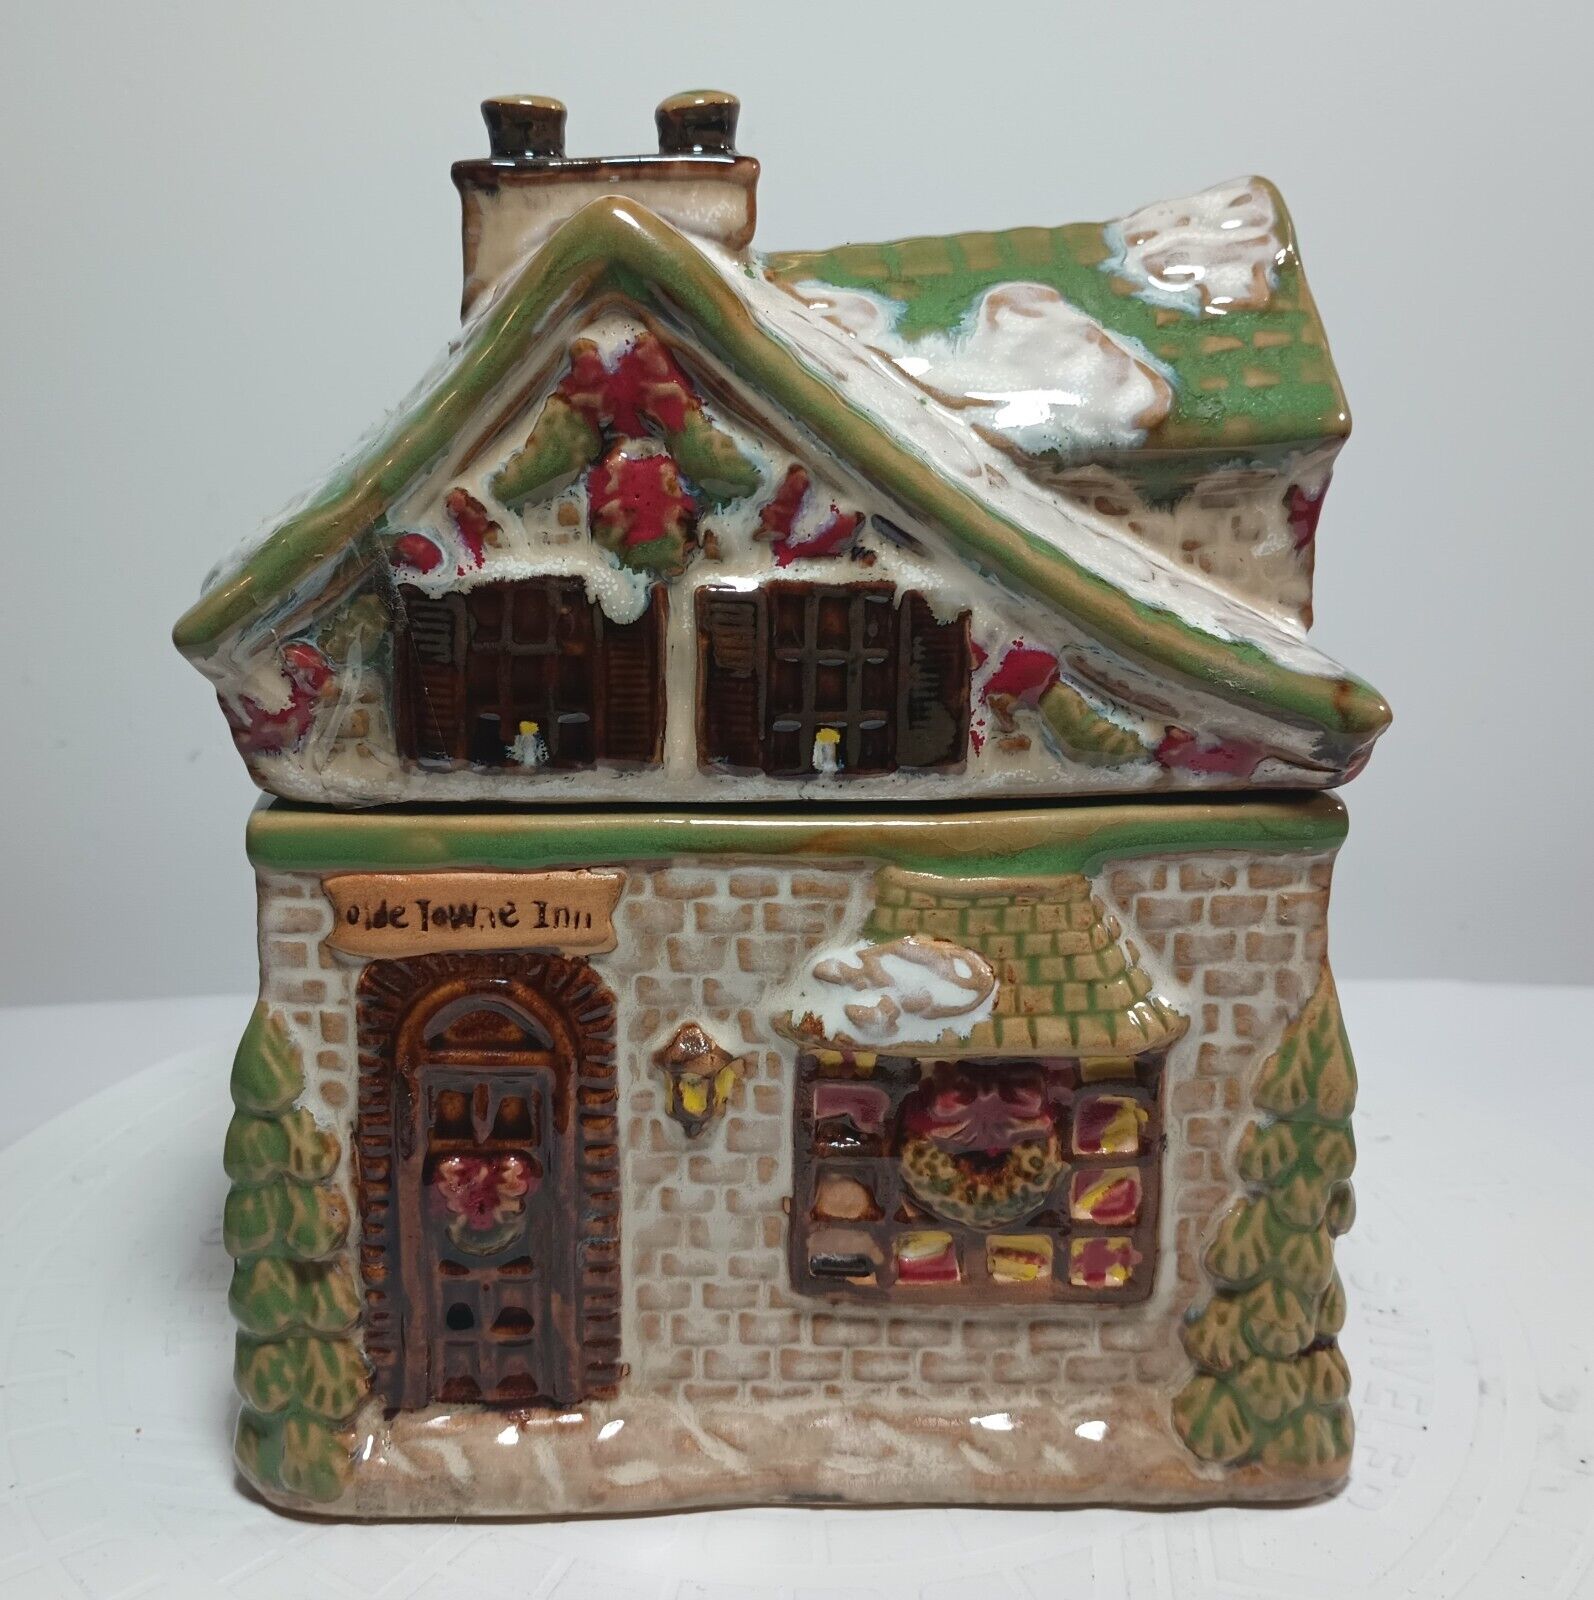 Enchanted Village Christmas Cottage Olde Towne Inn Ceramic Cookie Jar Collection